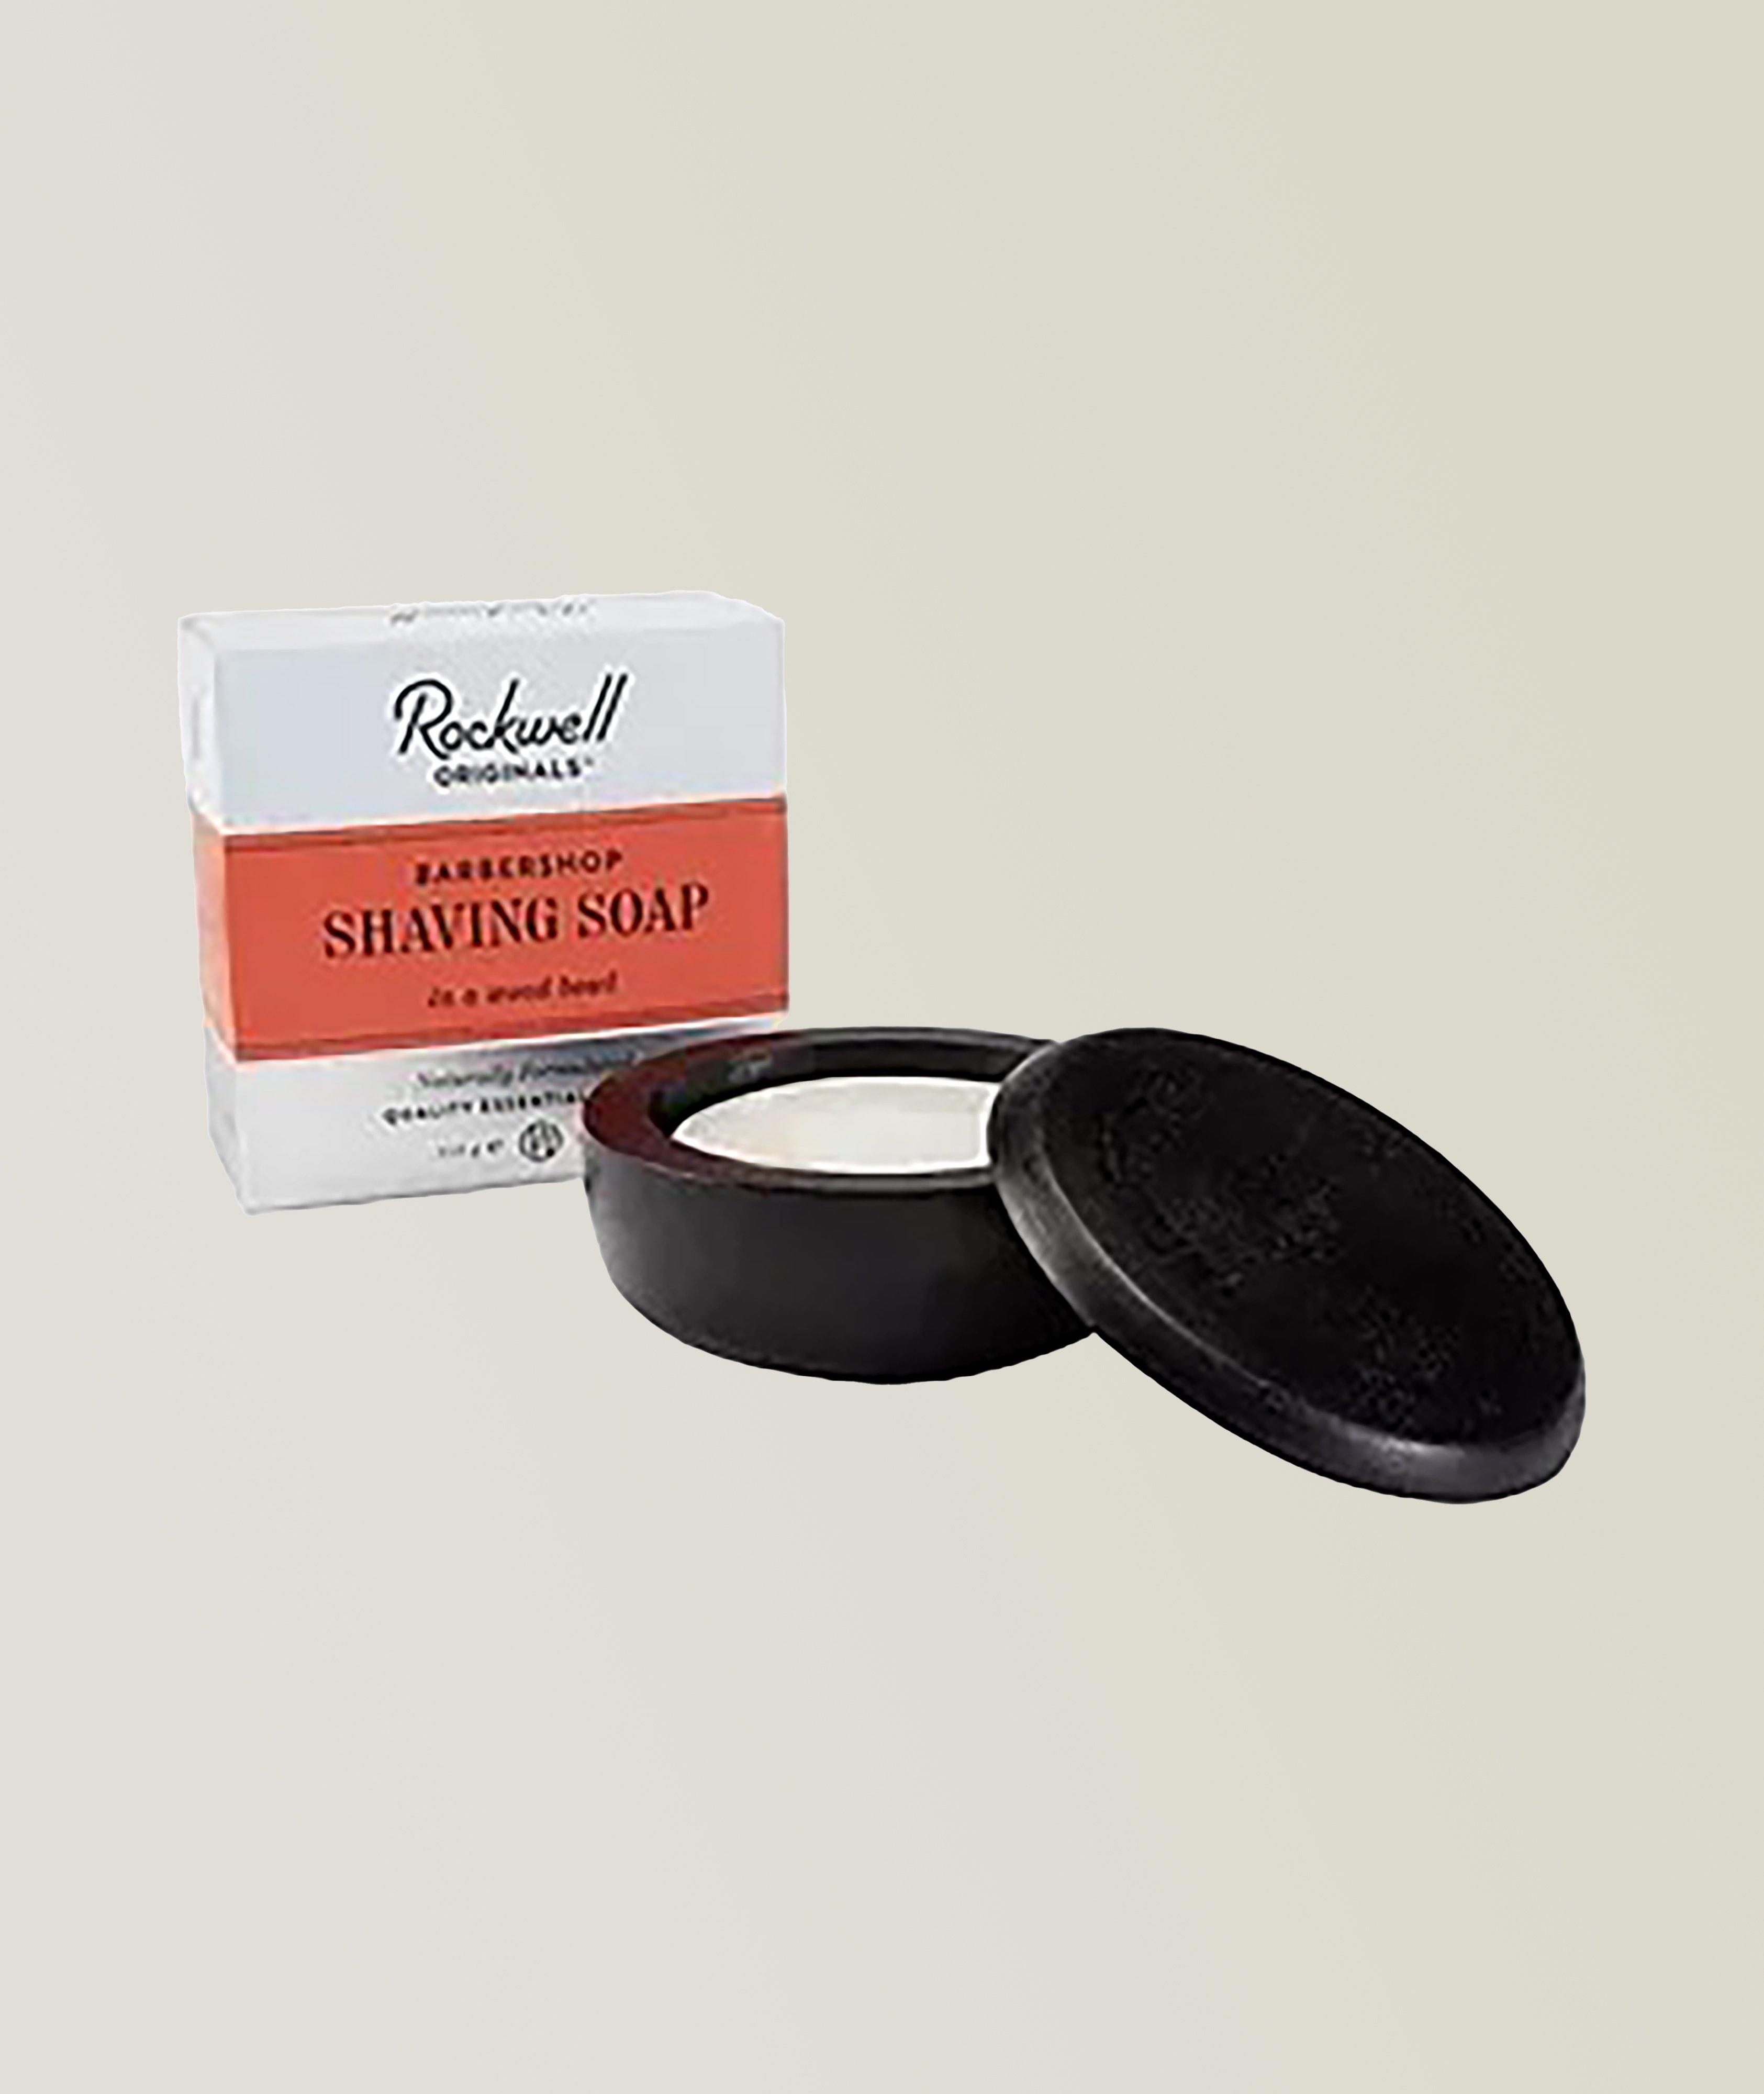 Harry Rosen Rockwell Shave Soap in a wooden Bowl - Barbershop Scent. 1